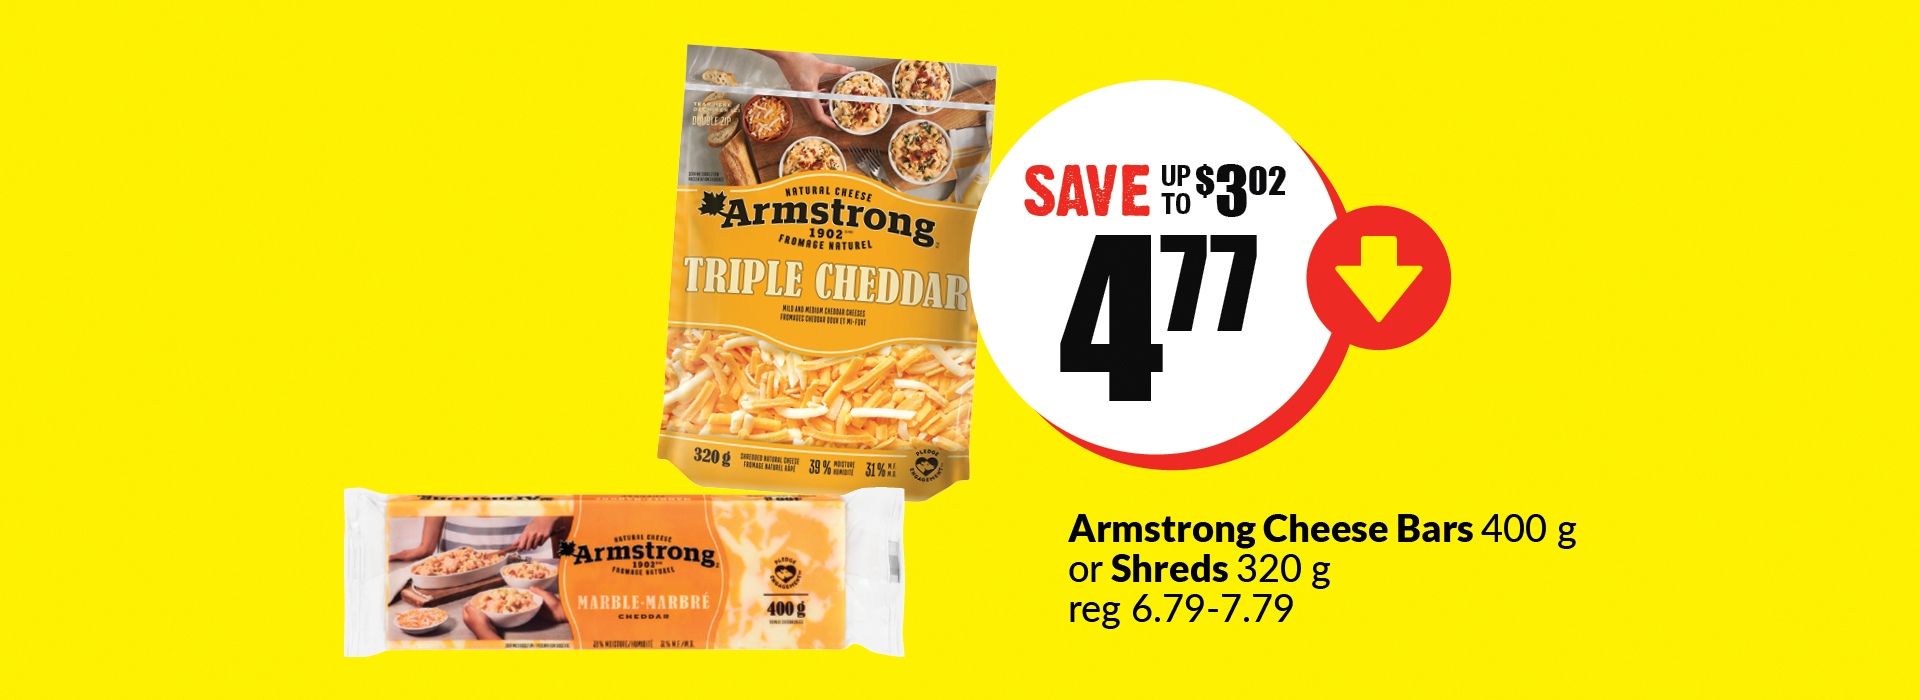 Armstrong cheese bars shreds